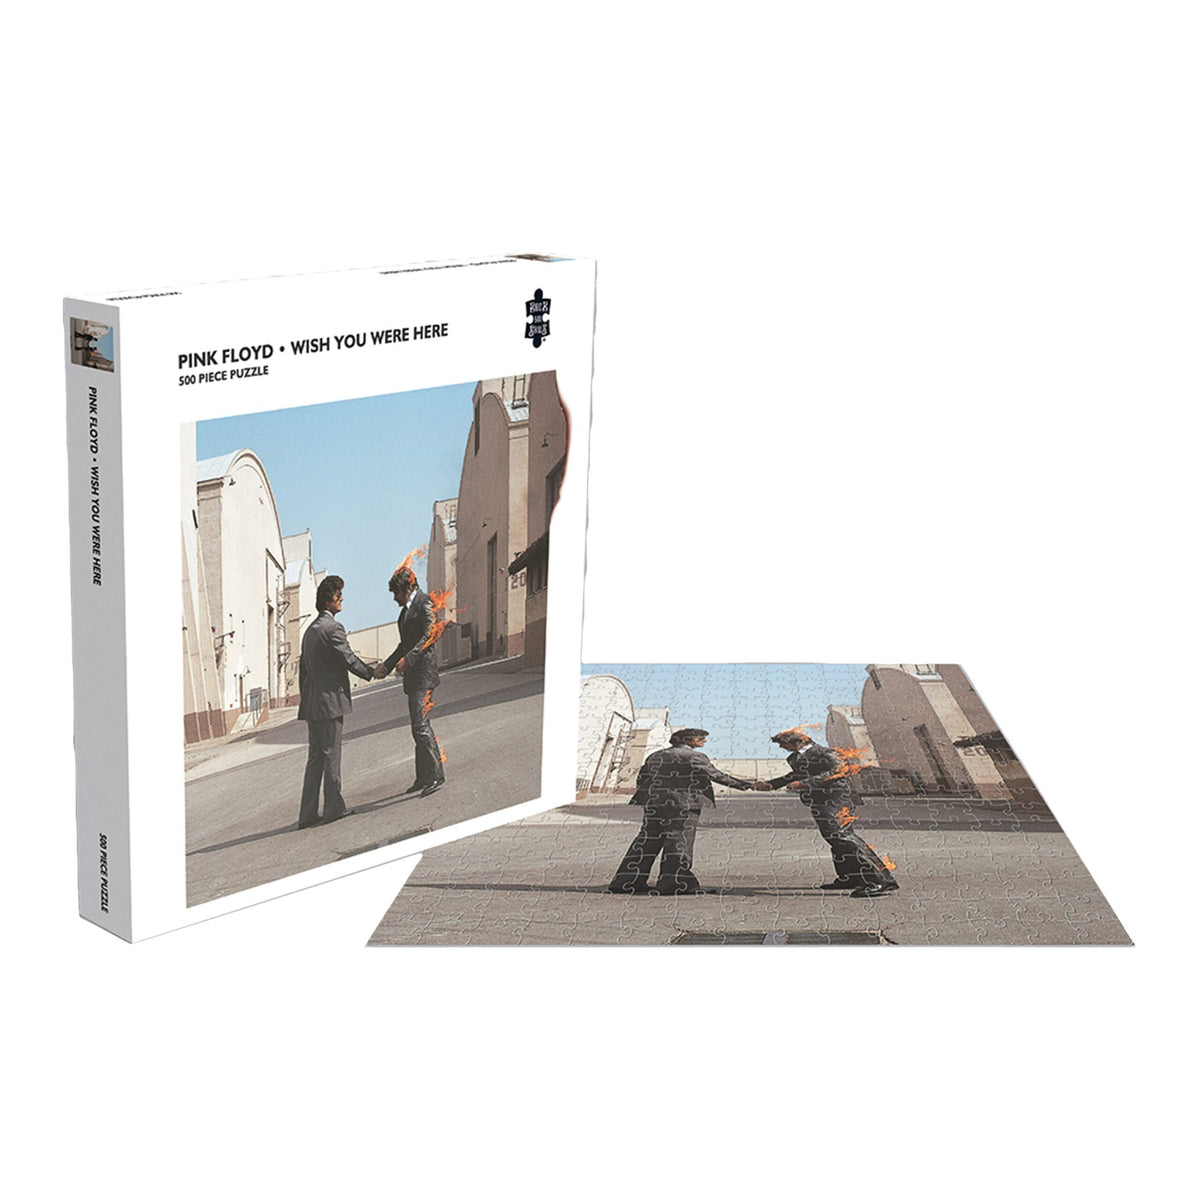 Pink Floyd Wish You Were Here Jigsaw Puzzle - 500 Piece